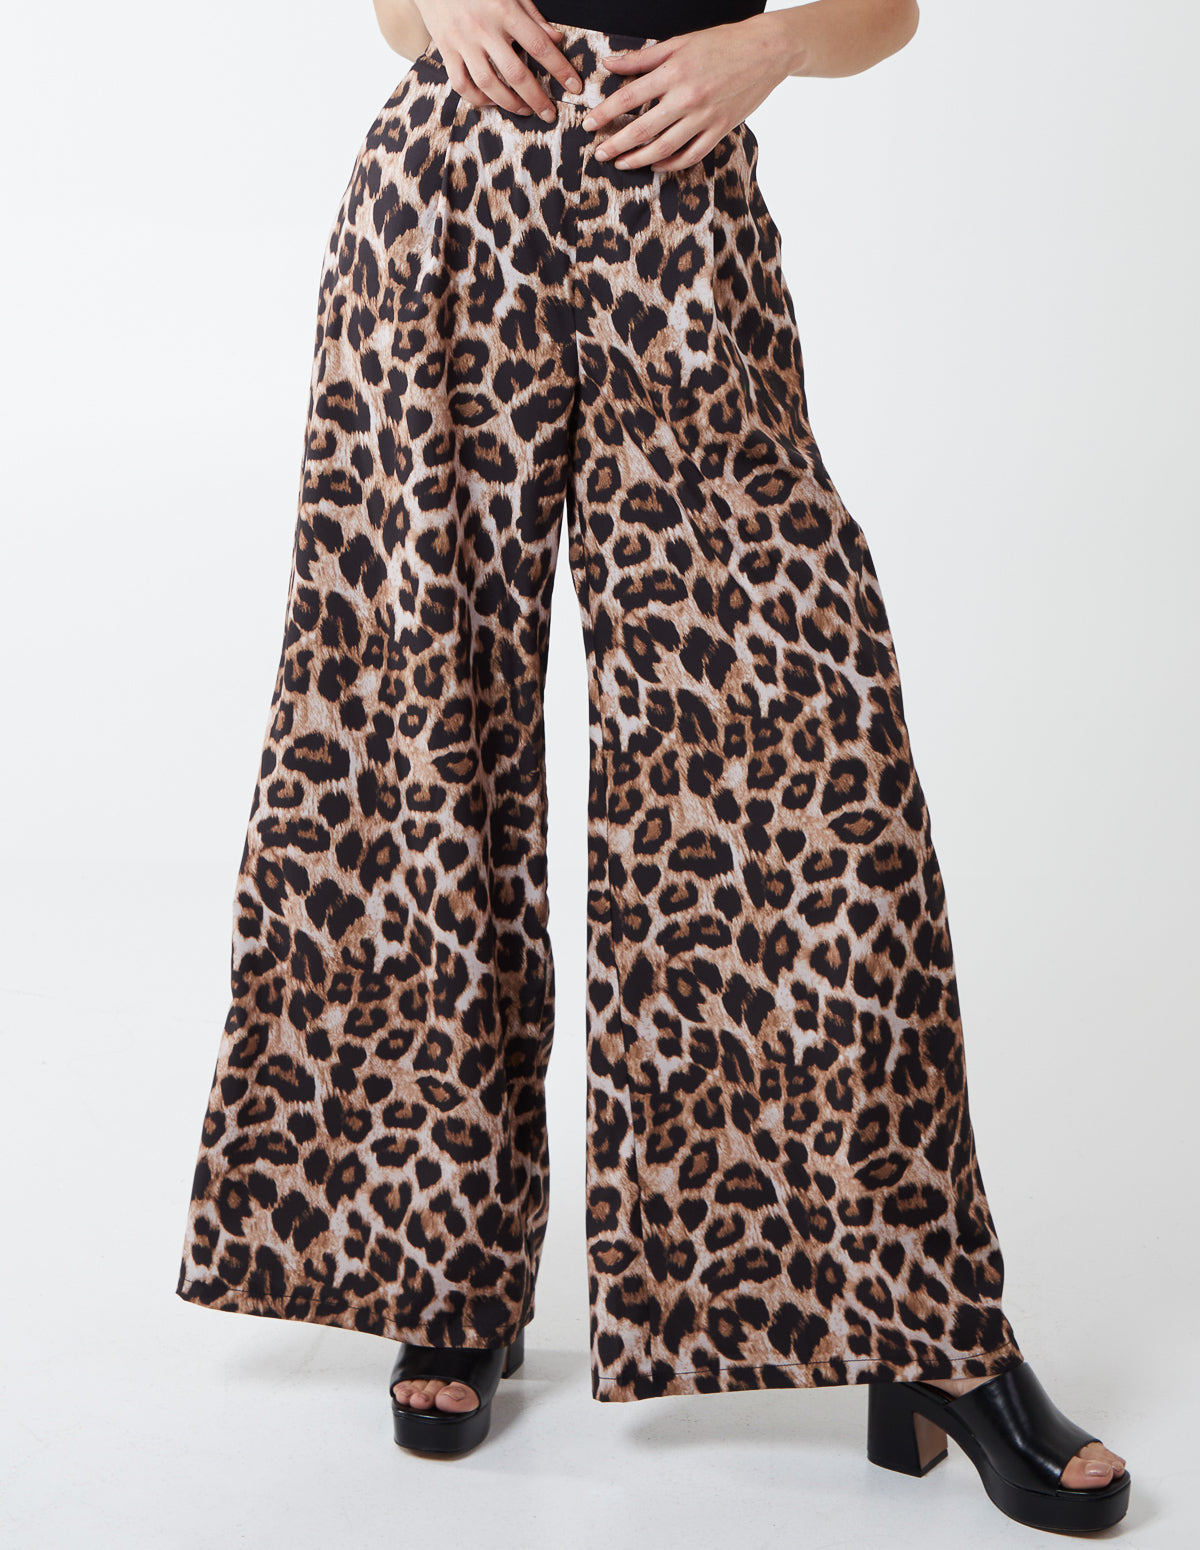 Best flared trousers 25 flares to shop for summer 2022